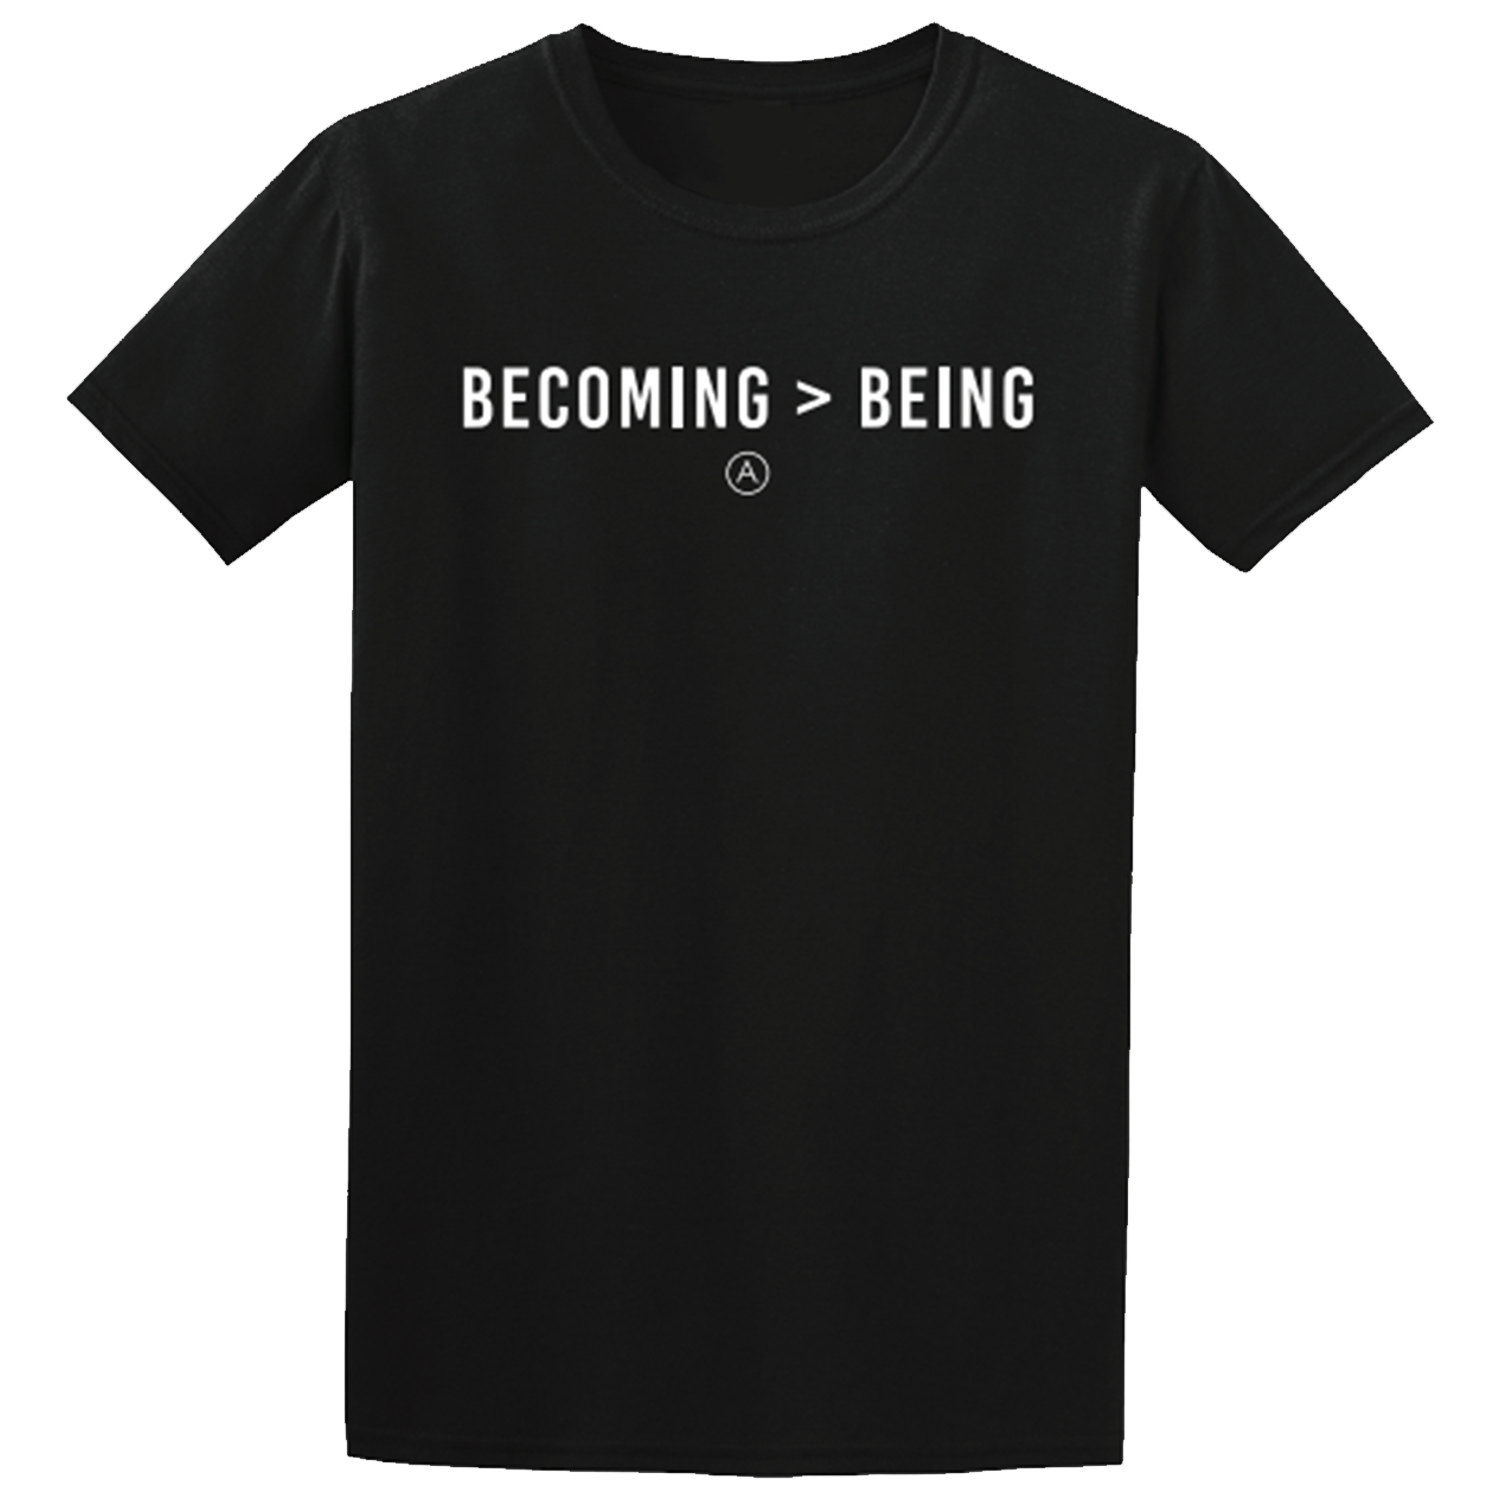 Becoming Is Greater Than Being Shirt Mockup Black.png